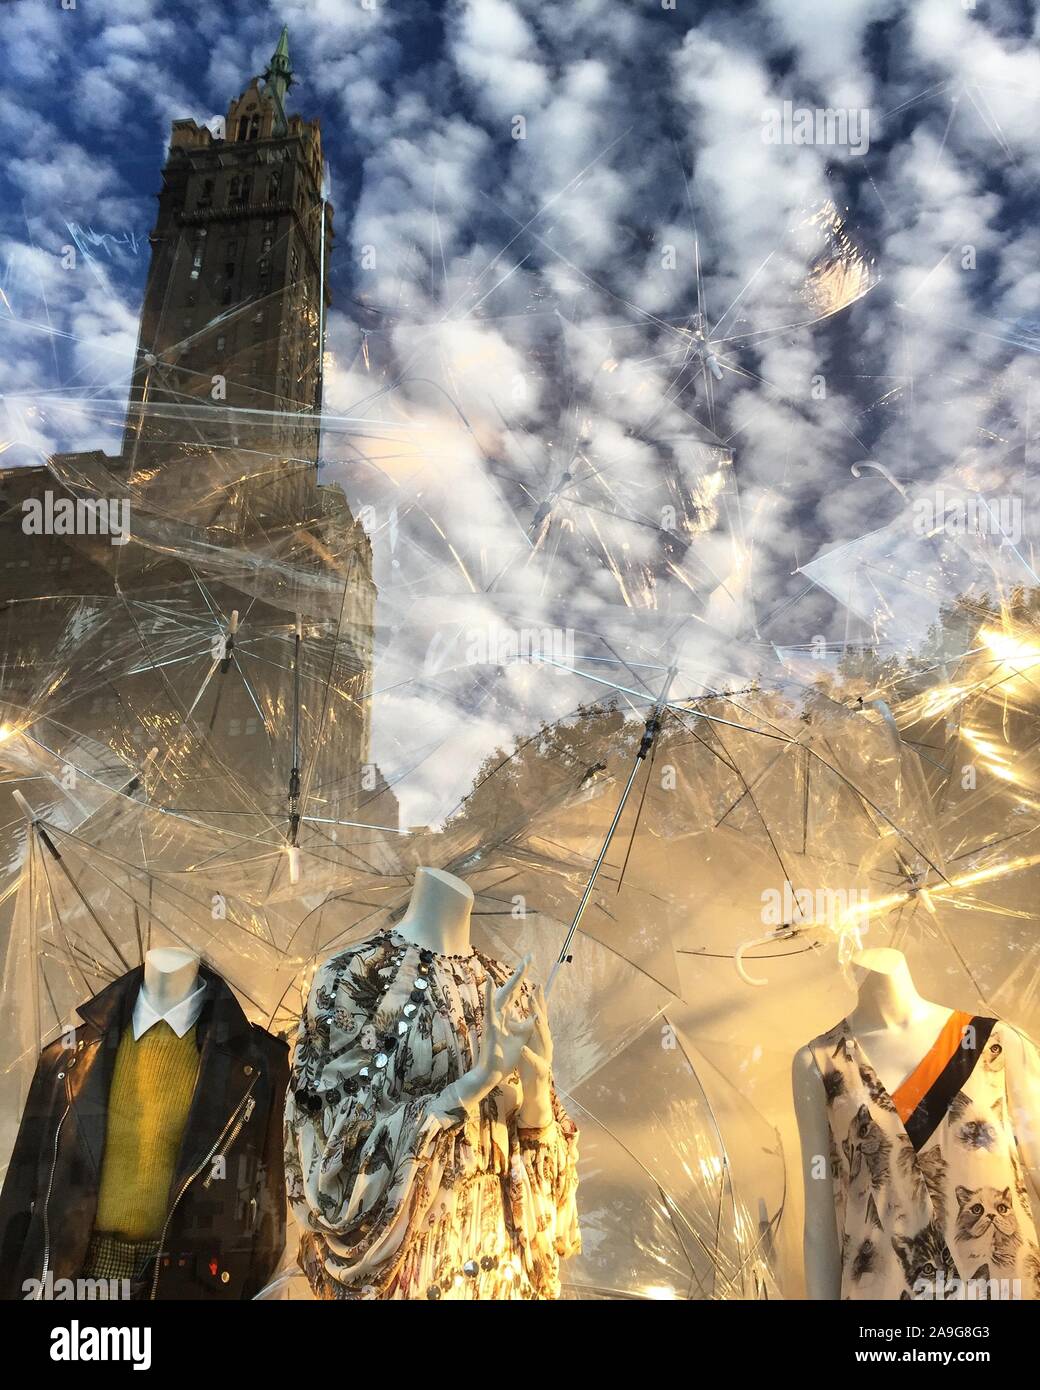 Spectators view holiday window display at Bergdorf Goodman in NYC Stock  Photo - Alamy